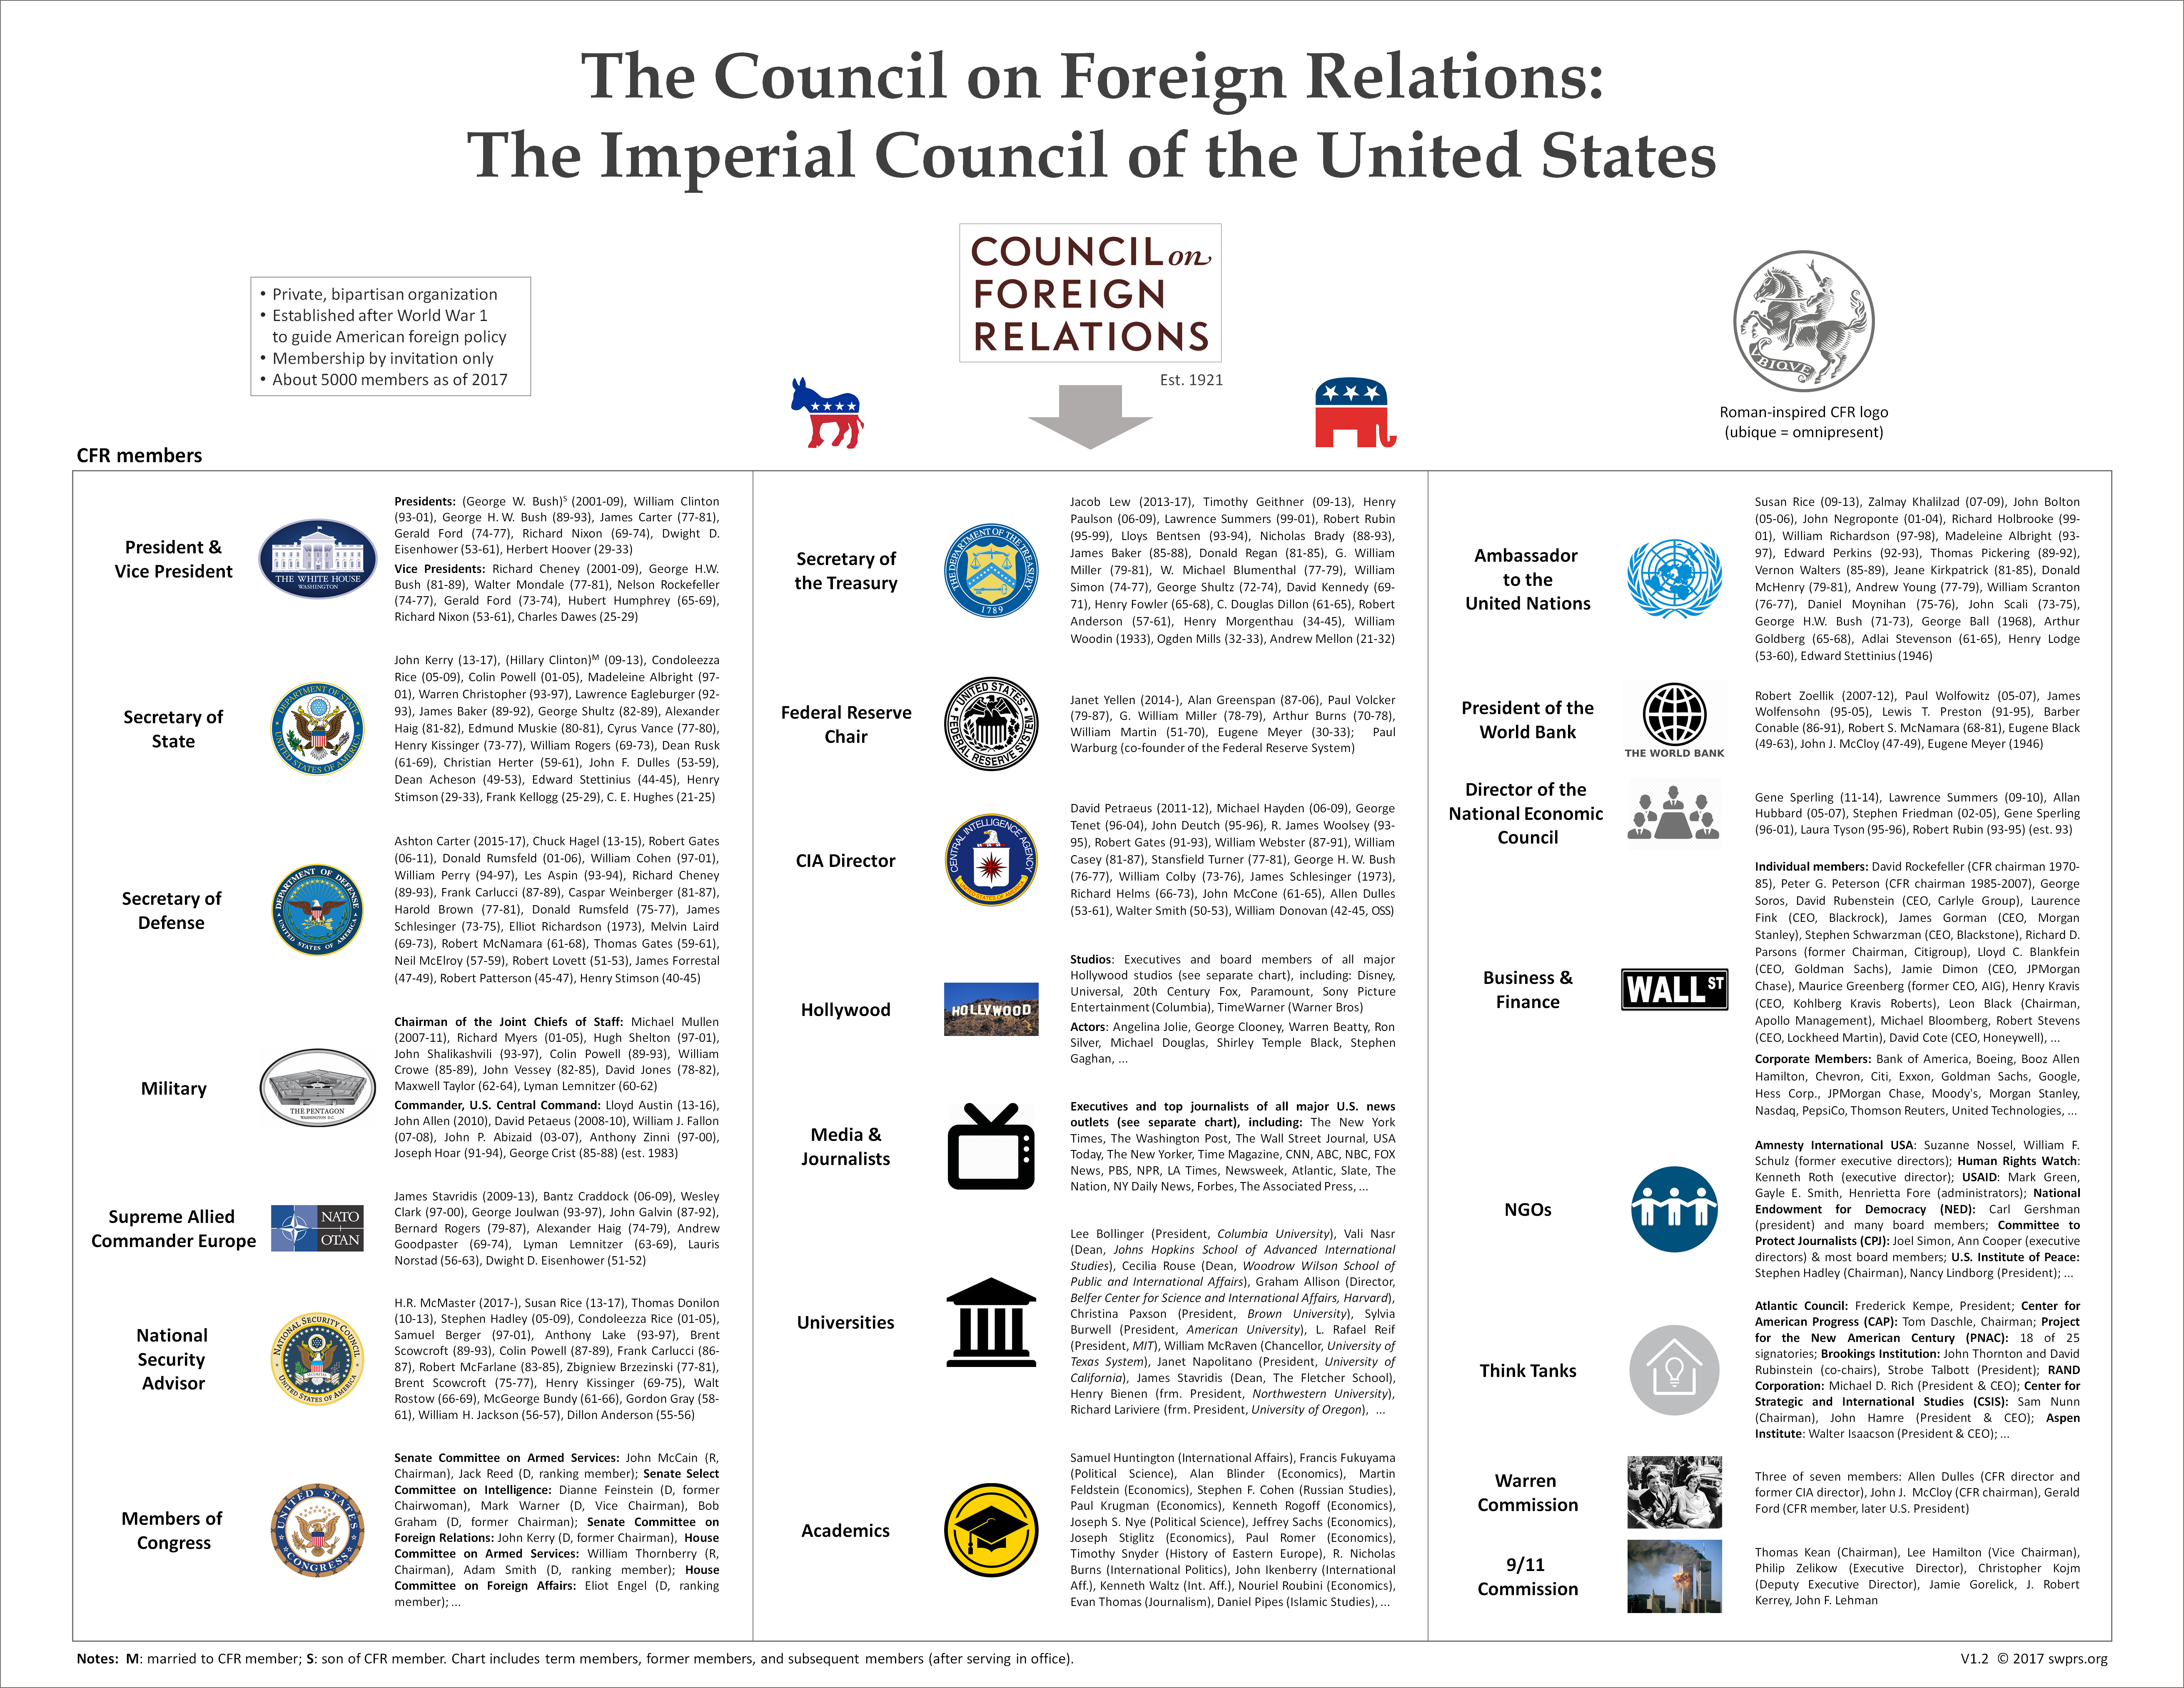 1945 to 2017: CFR members in key positions of the American Empire